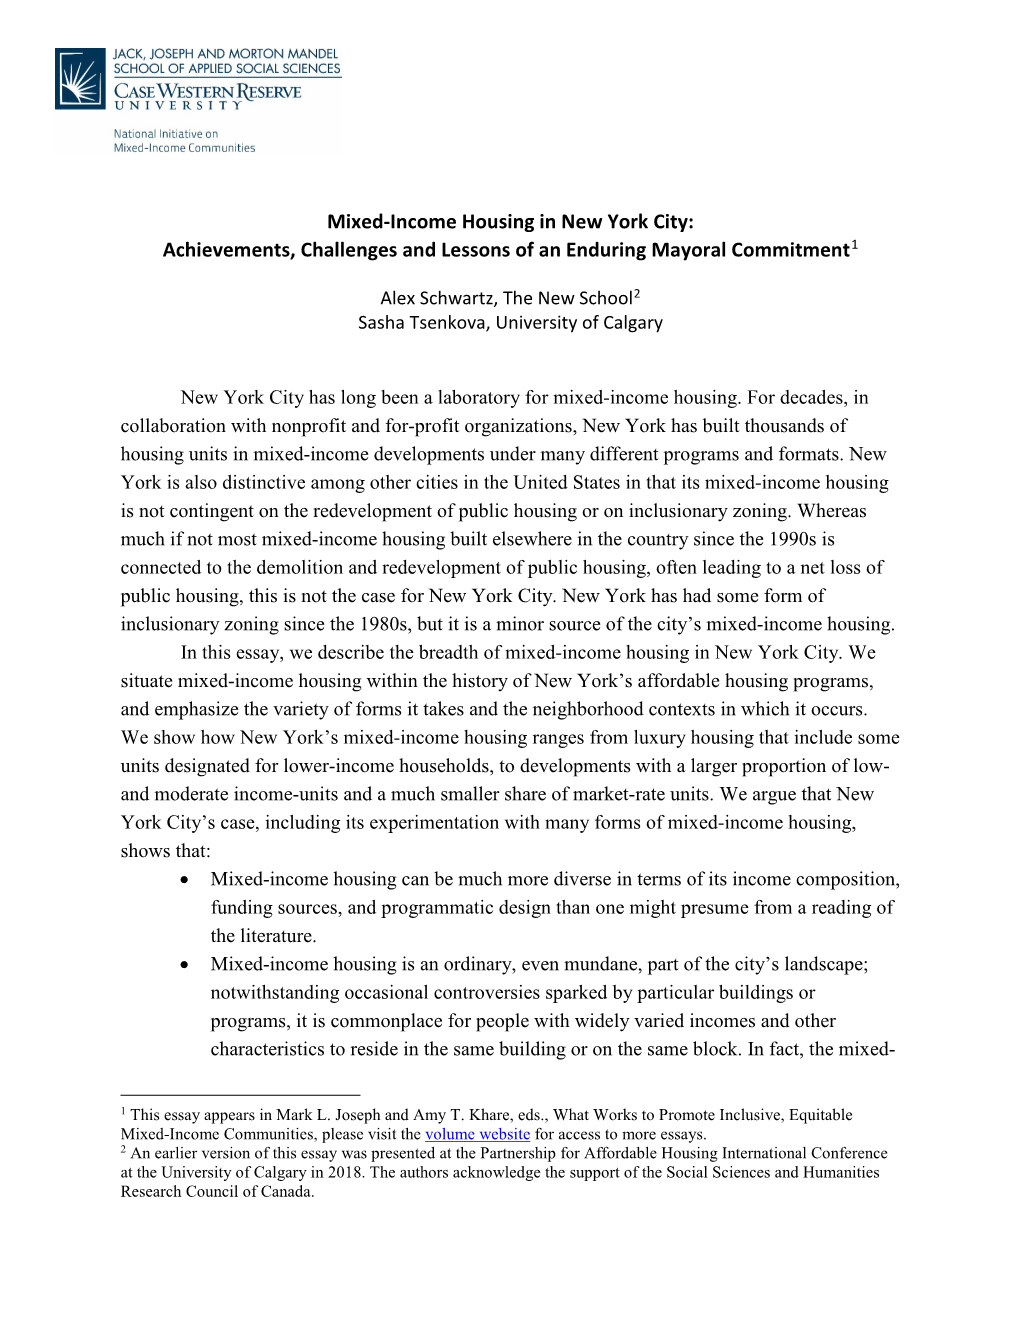 Mixed-Income Housing in New York City: Achievements, Challenges and Lessons of an Enduring Mayoral Commitment1